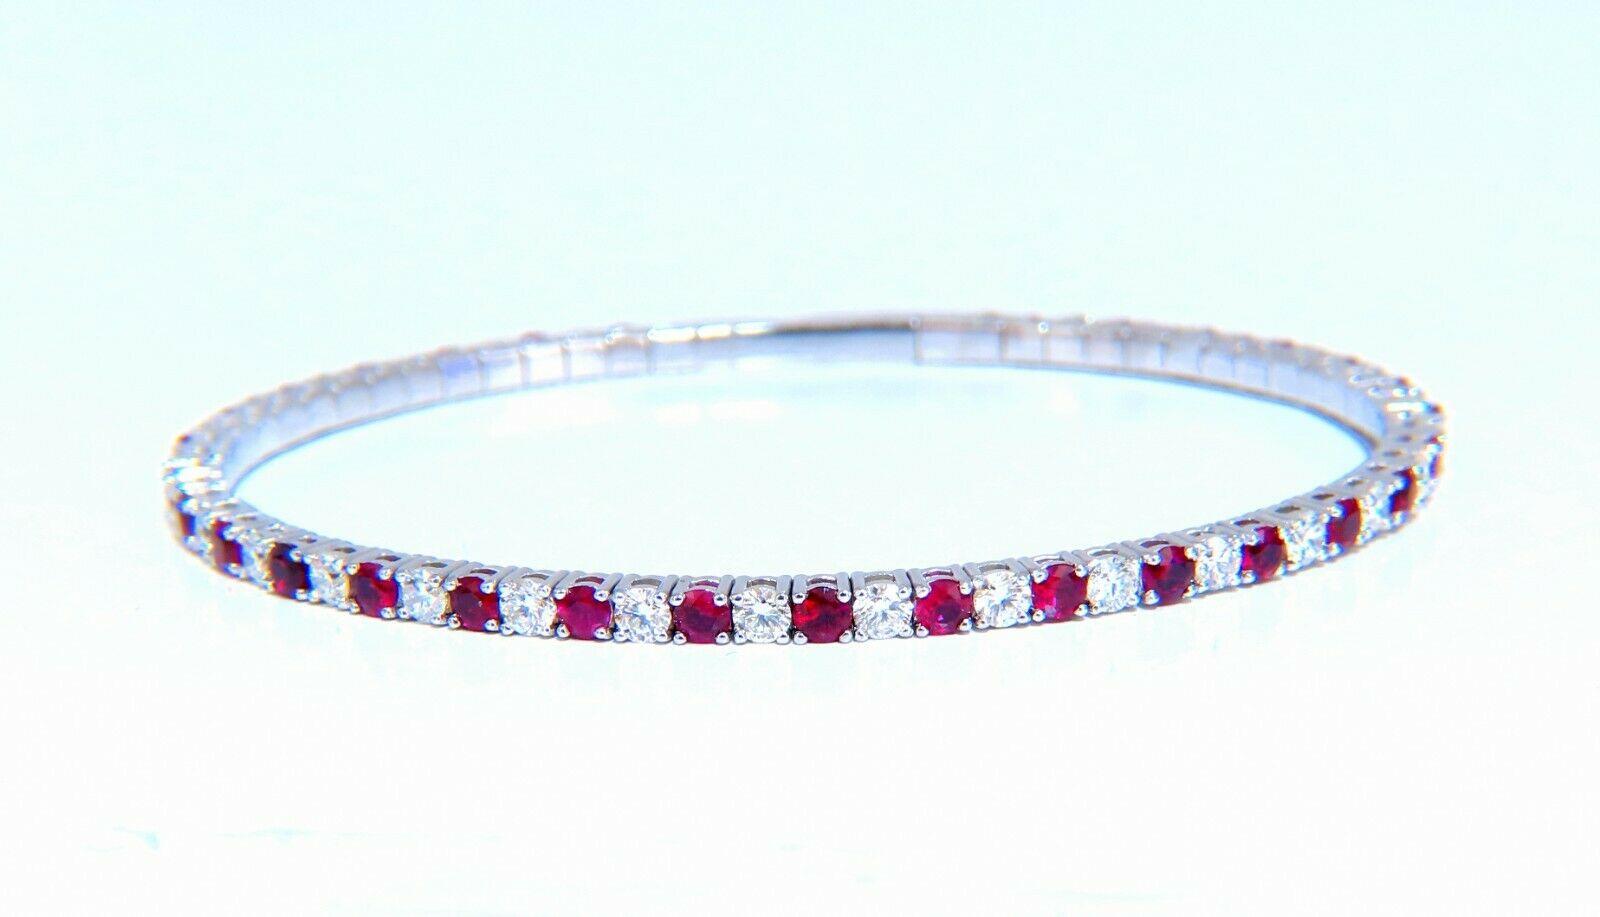 Ruby & Classic Alternating Tennis Flexible Bangle

3.15ct. Natural ruby bracelet.

Rounds, full cuts 

Clean clarity

Transparent & Vivid Reds.

Average 2.5mm each

2.10ct Natural Diamonds

Rounds & full cuts

Vs-s clarity G-color

14kt. white gold